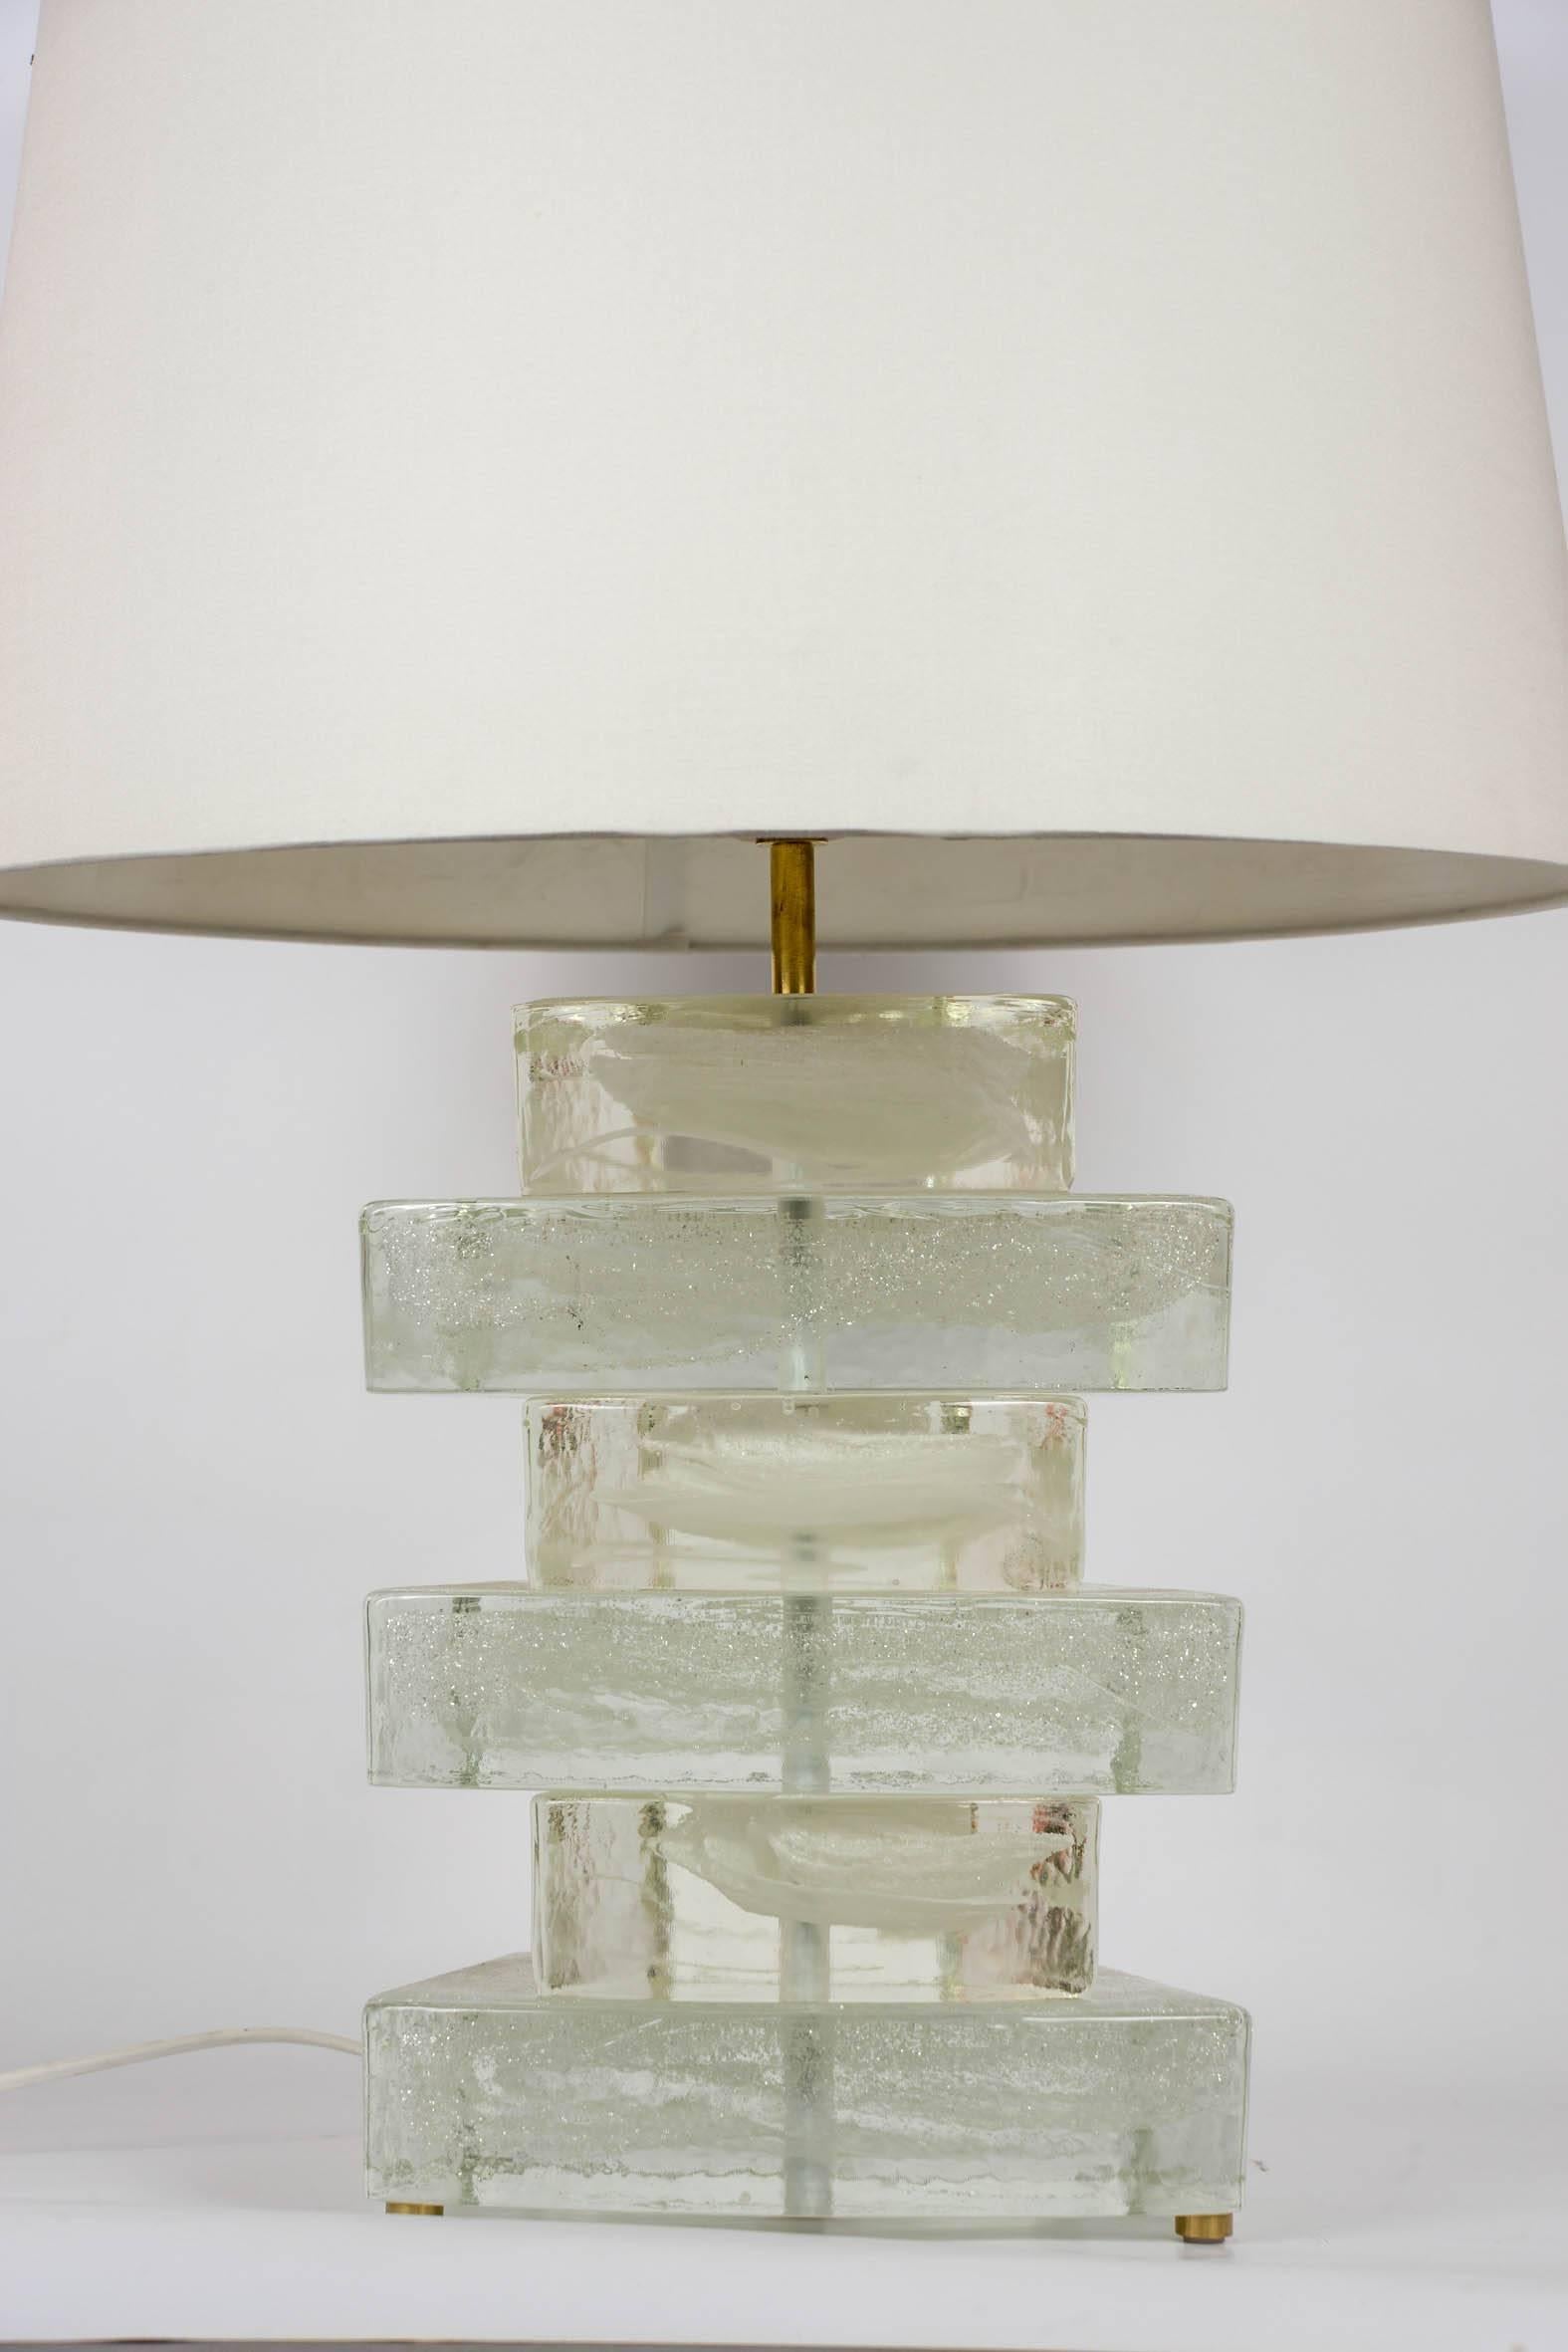 White Murano glass table lamps
Dimensions given without shade
No shade provided.